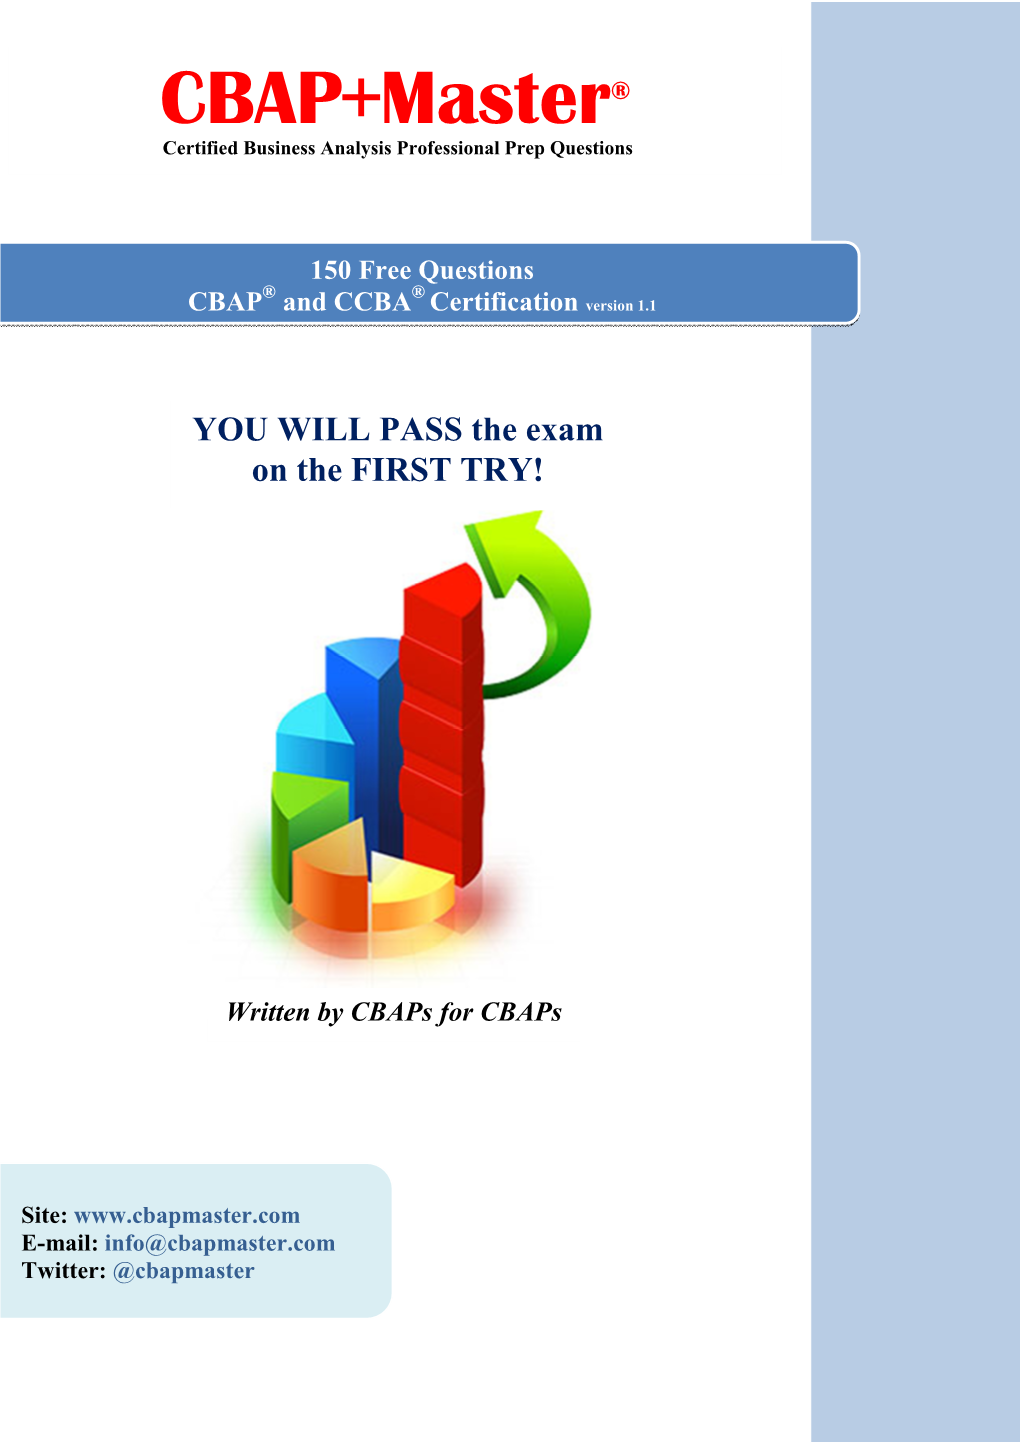 CBAP+Master Certified Business Analysis Professional Prep Questions